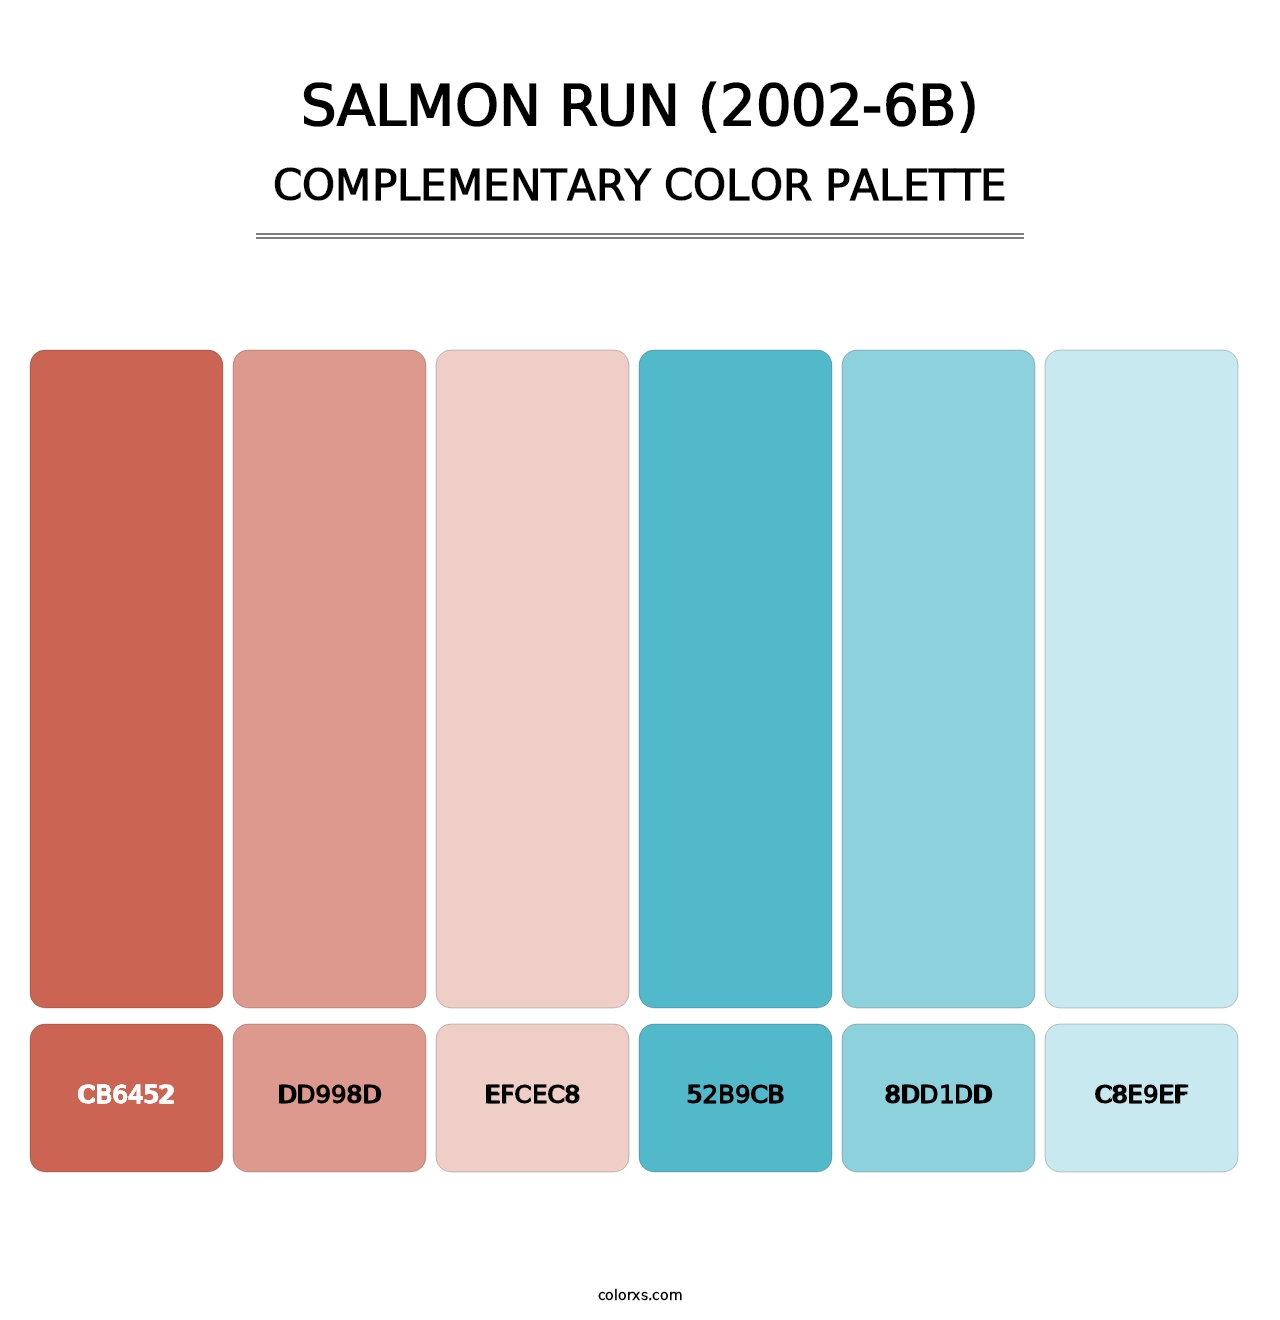 Salmon Run (2002-6B) - Complementary Color Palette